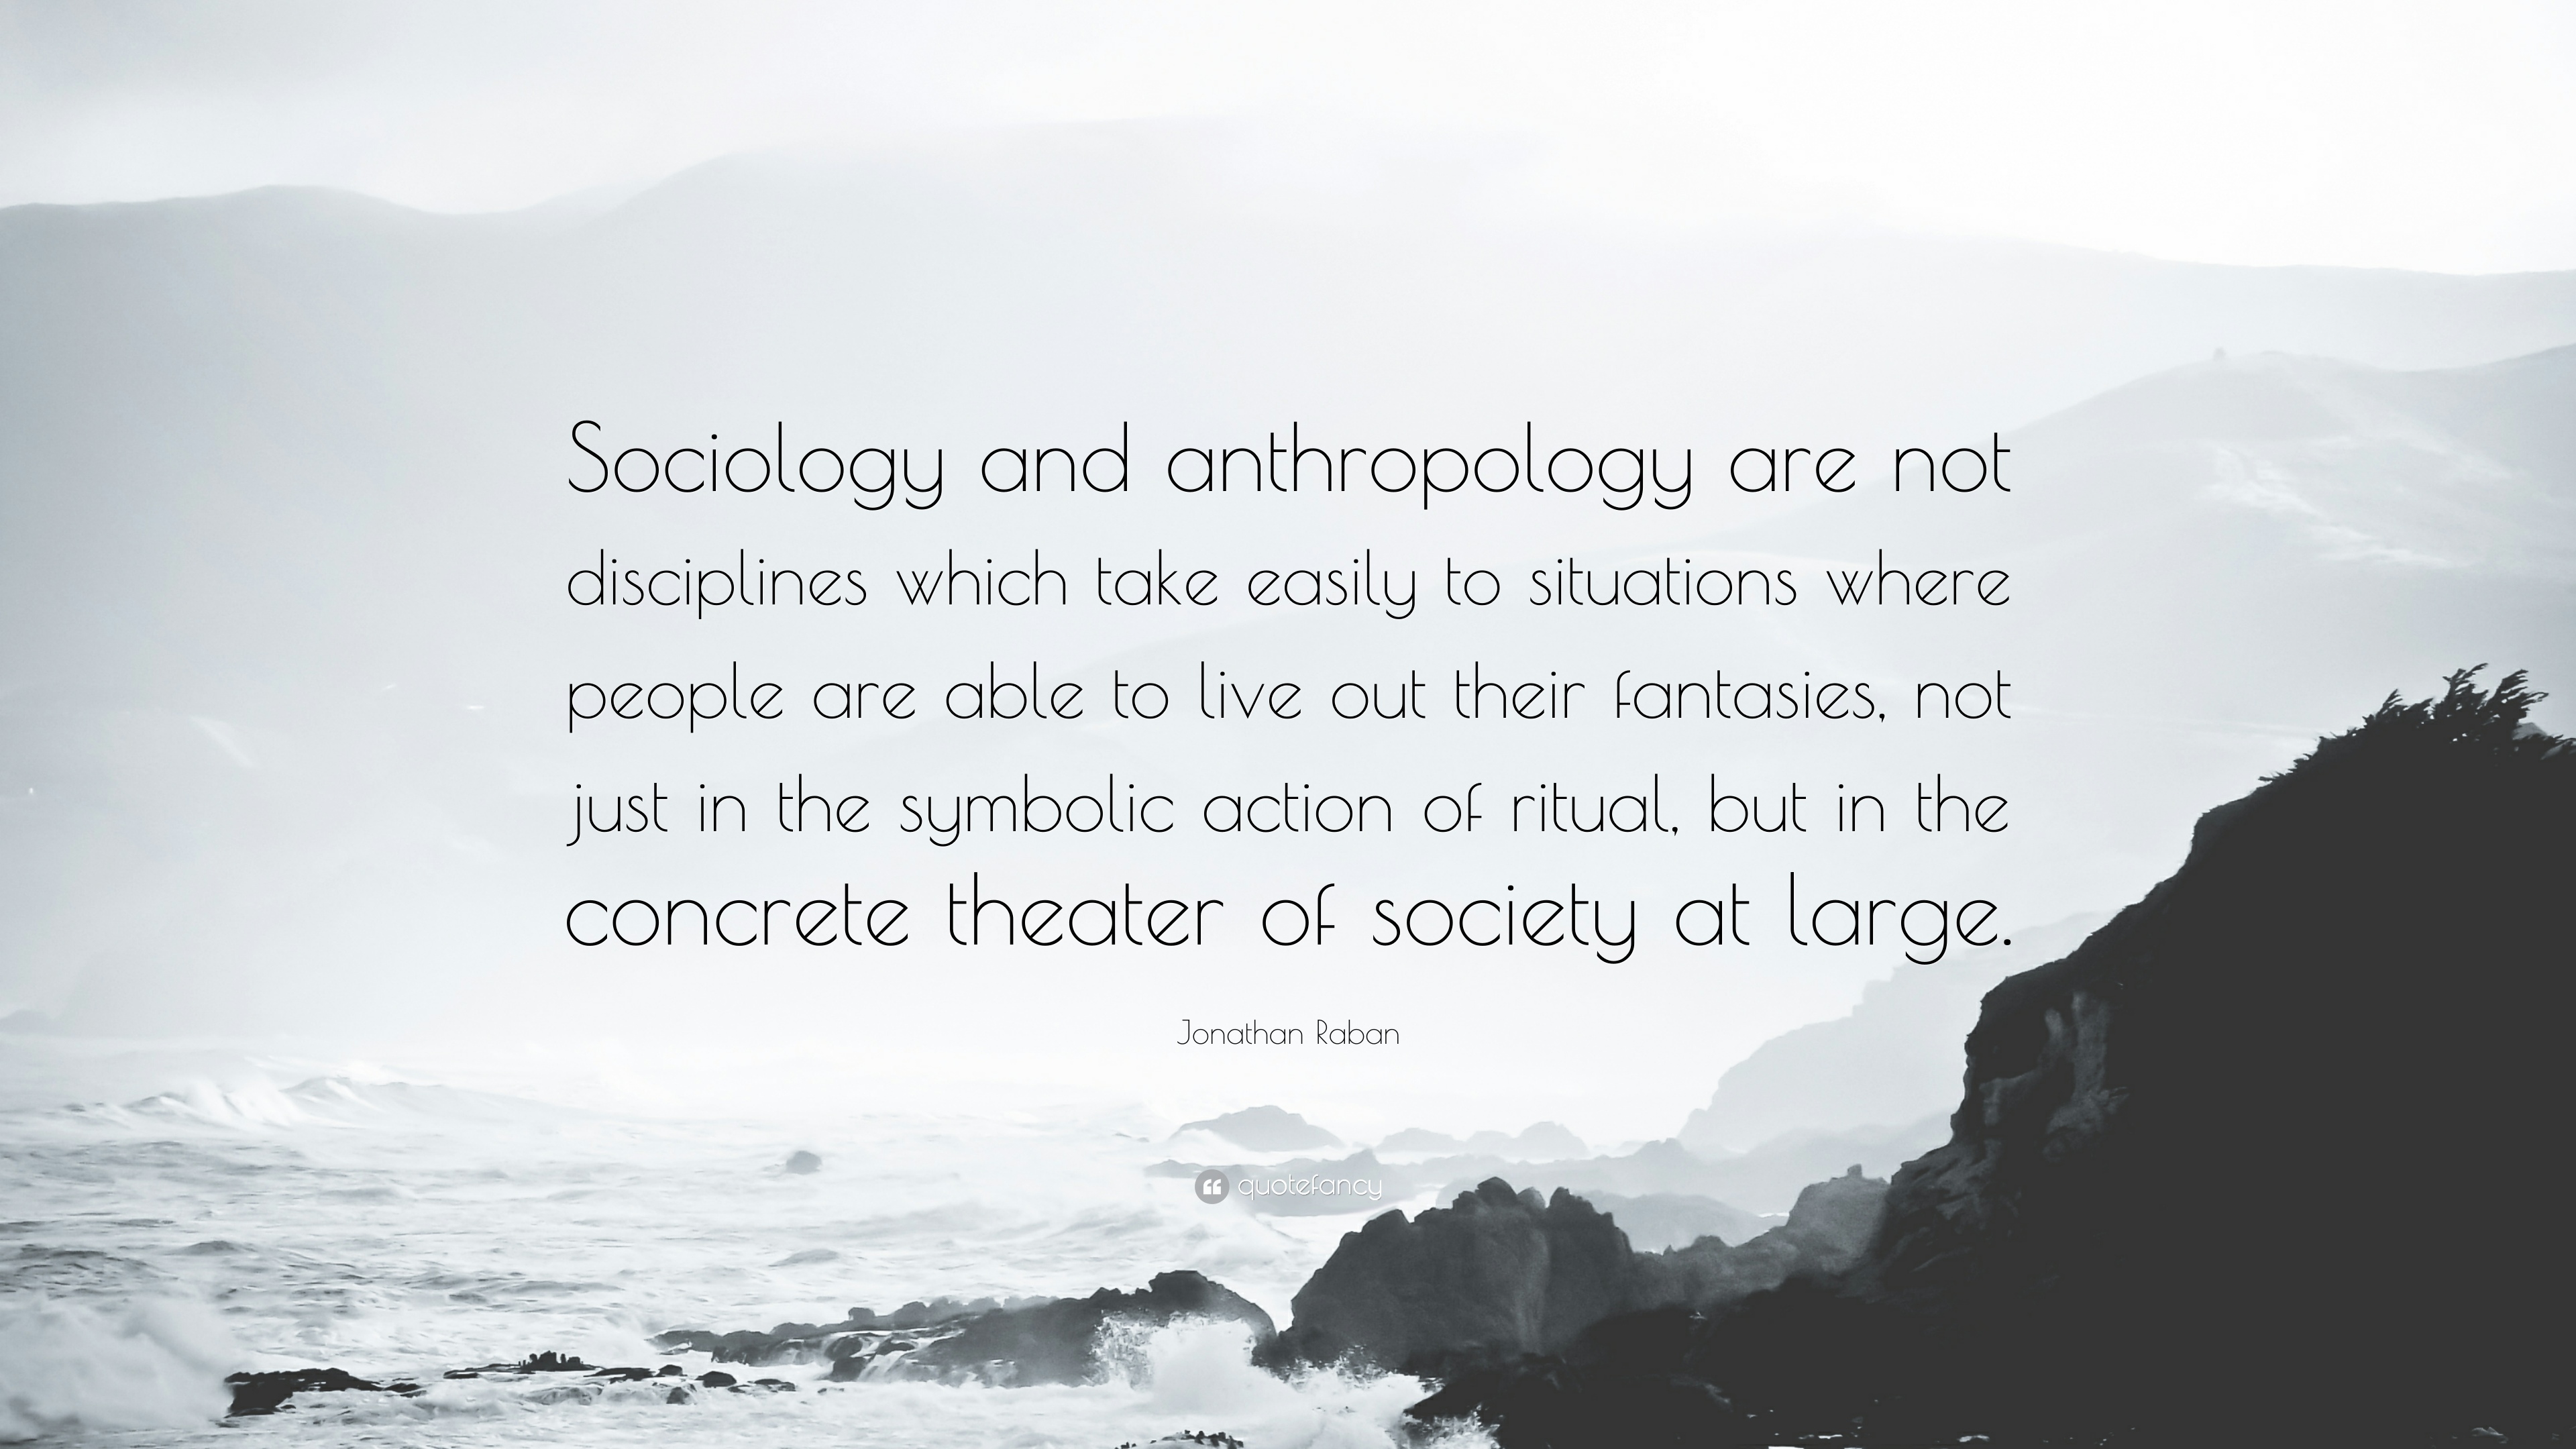 Jonathan Raban Quote: “Sociology and anthropology are not